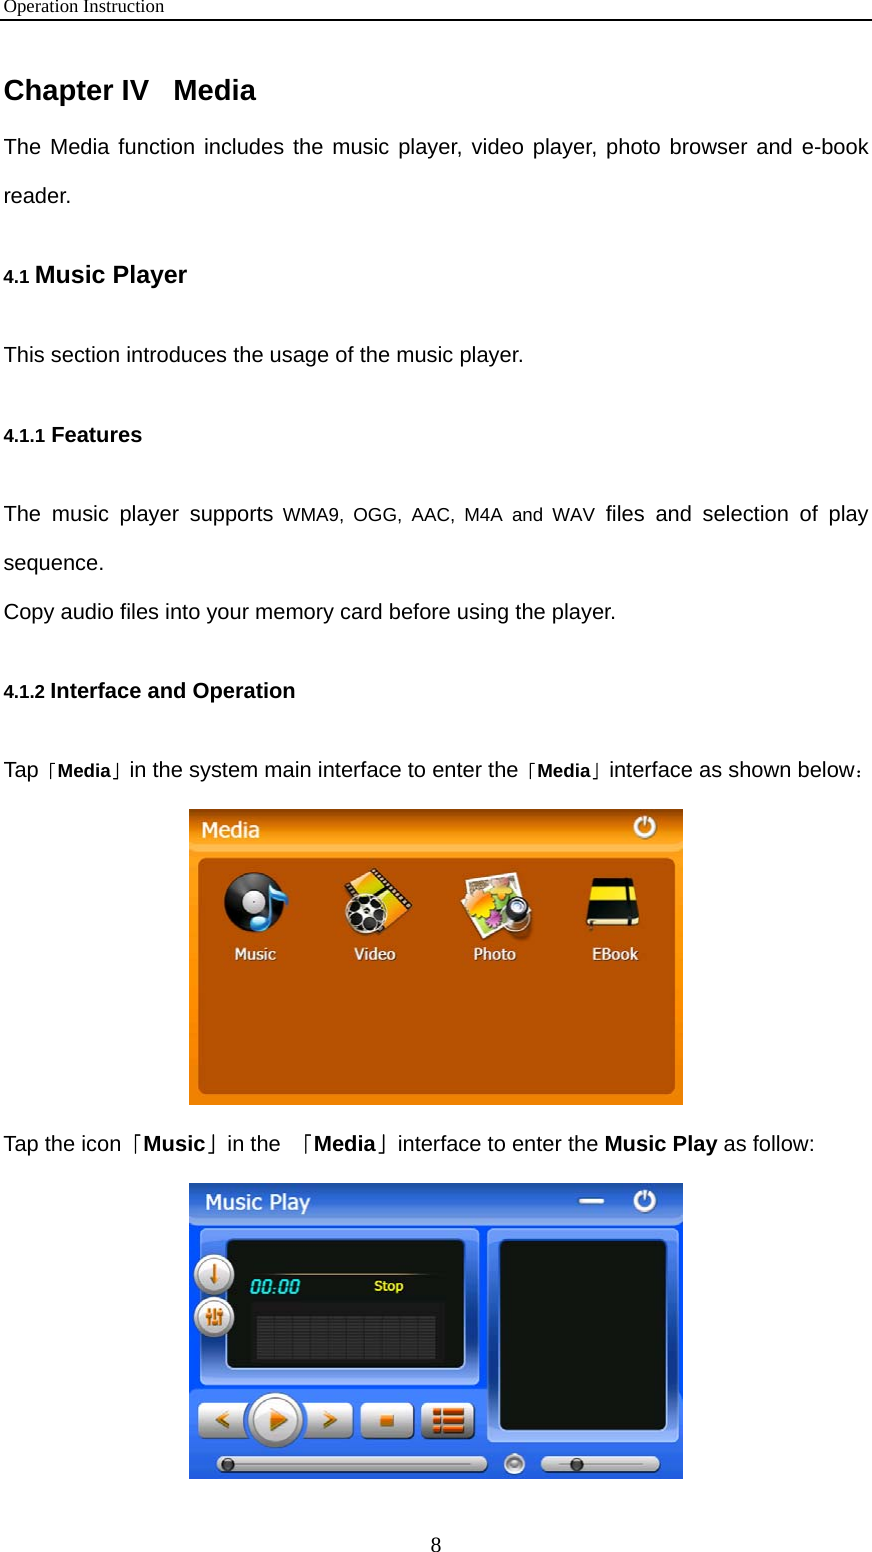 Operation Instruction 8 Chapter IV   Media The Media function includes the music player, video player, photo browser and e-book reader.  4.1 Music Player This section introduces the usage of the music player.  4.1.1 Features The music player supports WMA9, OGG, AAC, M4A and WAV files and selection of play sequence.  Copy audio files into your memory card before using the player.  4.1.2 Interface and Operation Tap「Media」in the system main interface to enter the「Media」interface as shown below：  Tap the icon「Music」in the  「Media」interface to enter the Music Play as follow:  